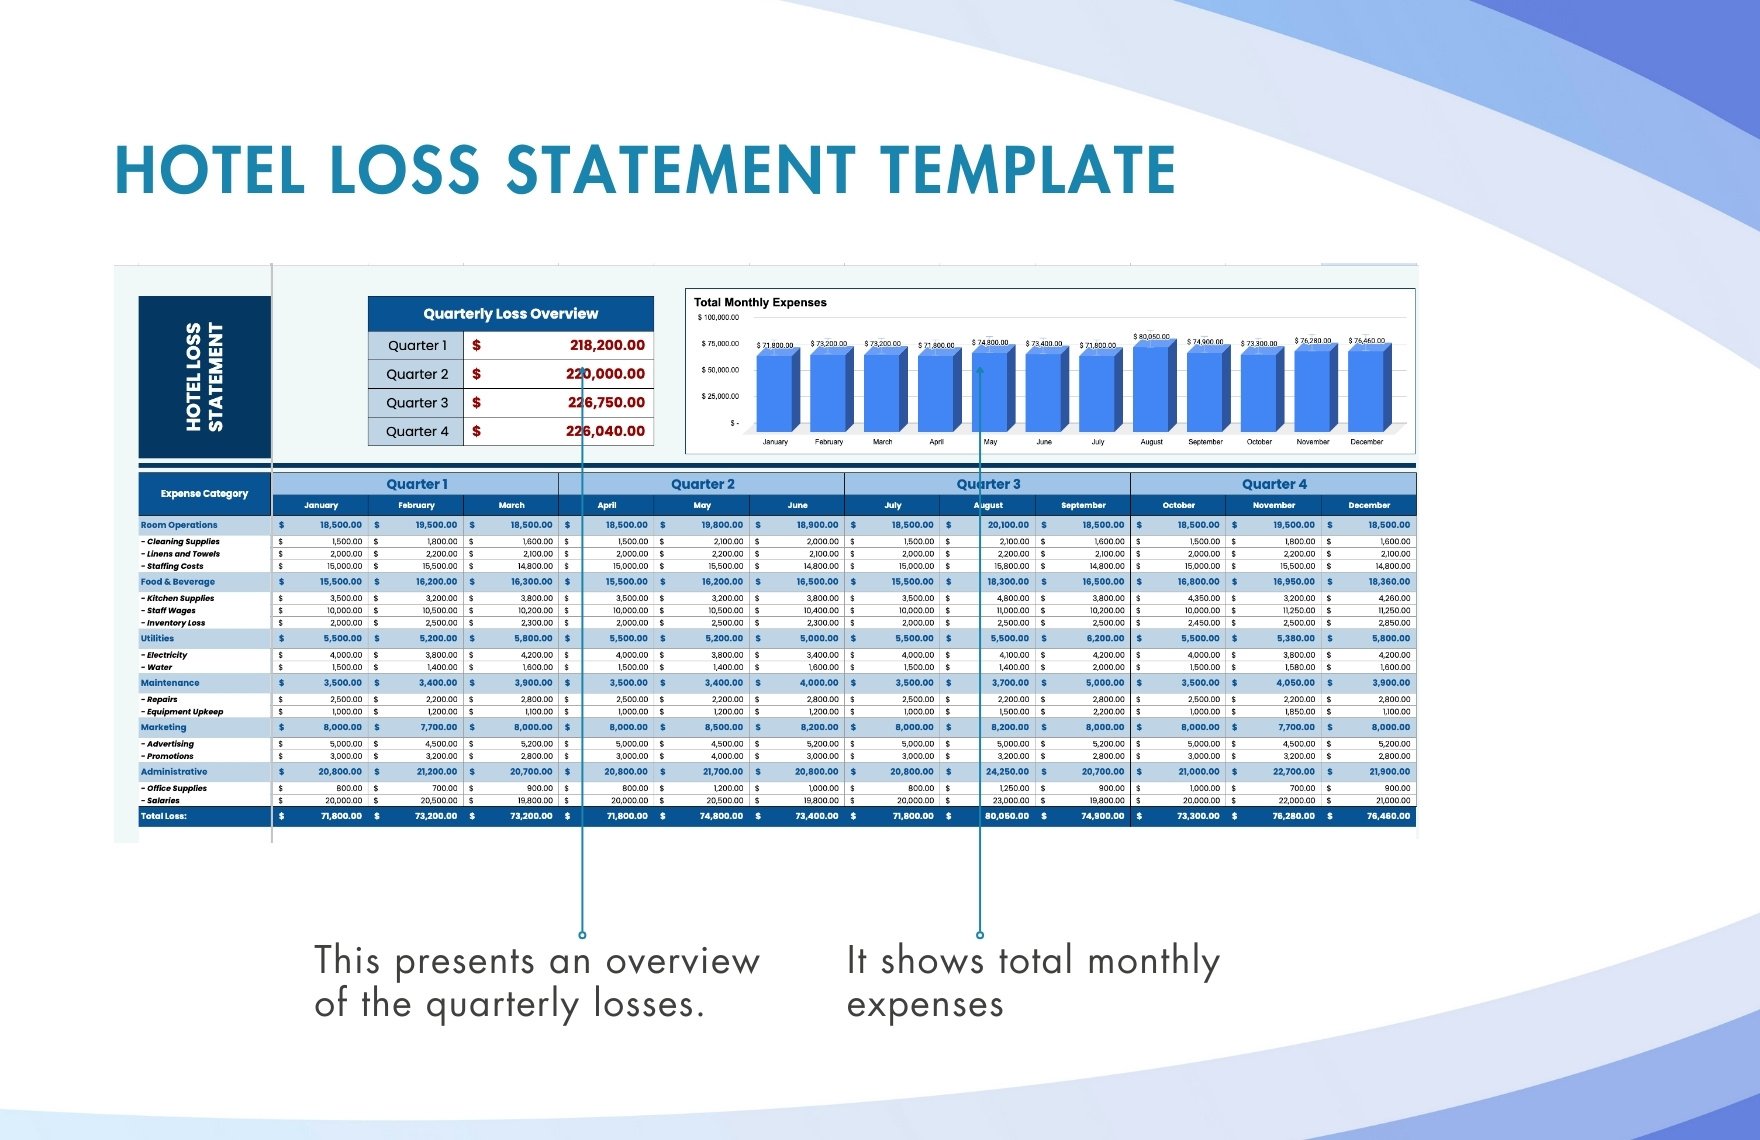 Hotel Loss Statement Template